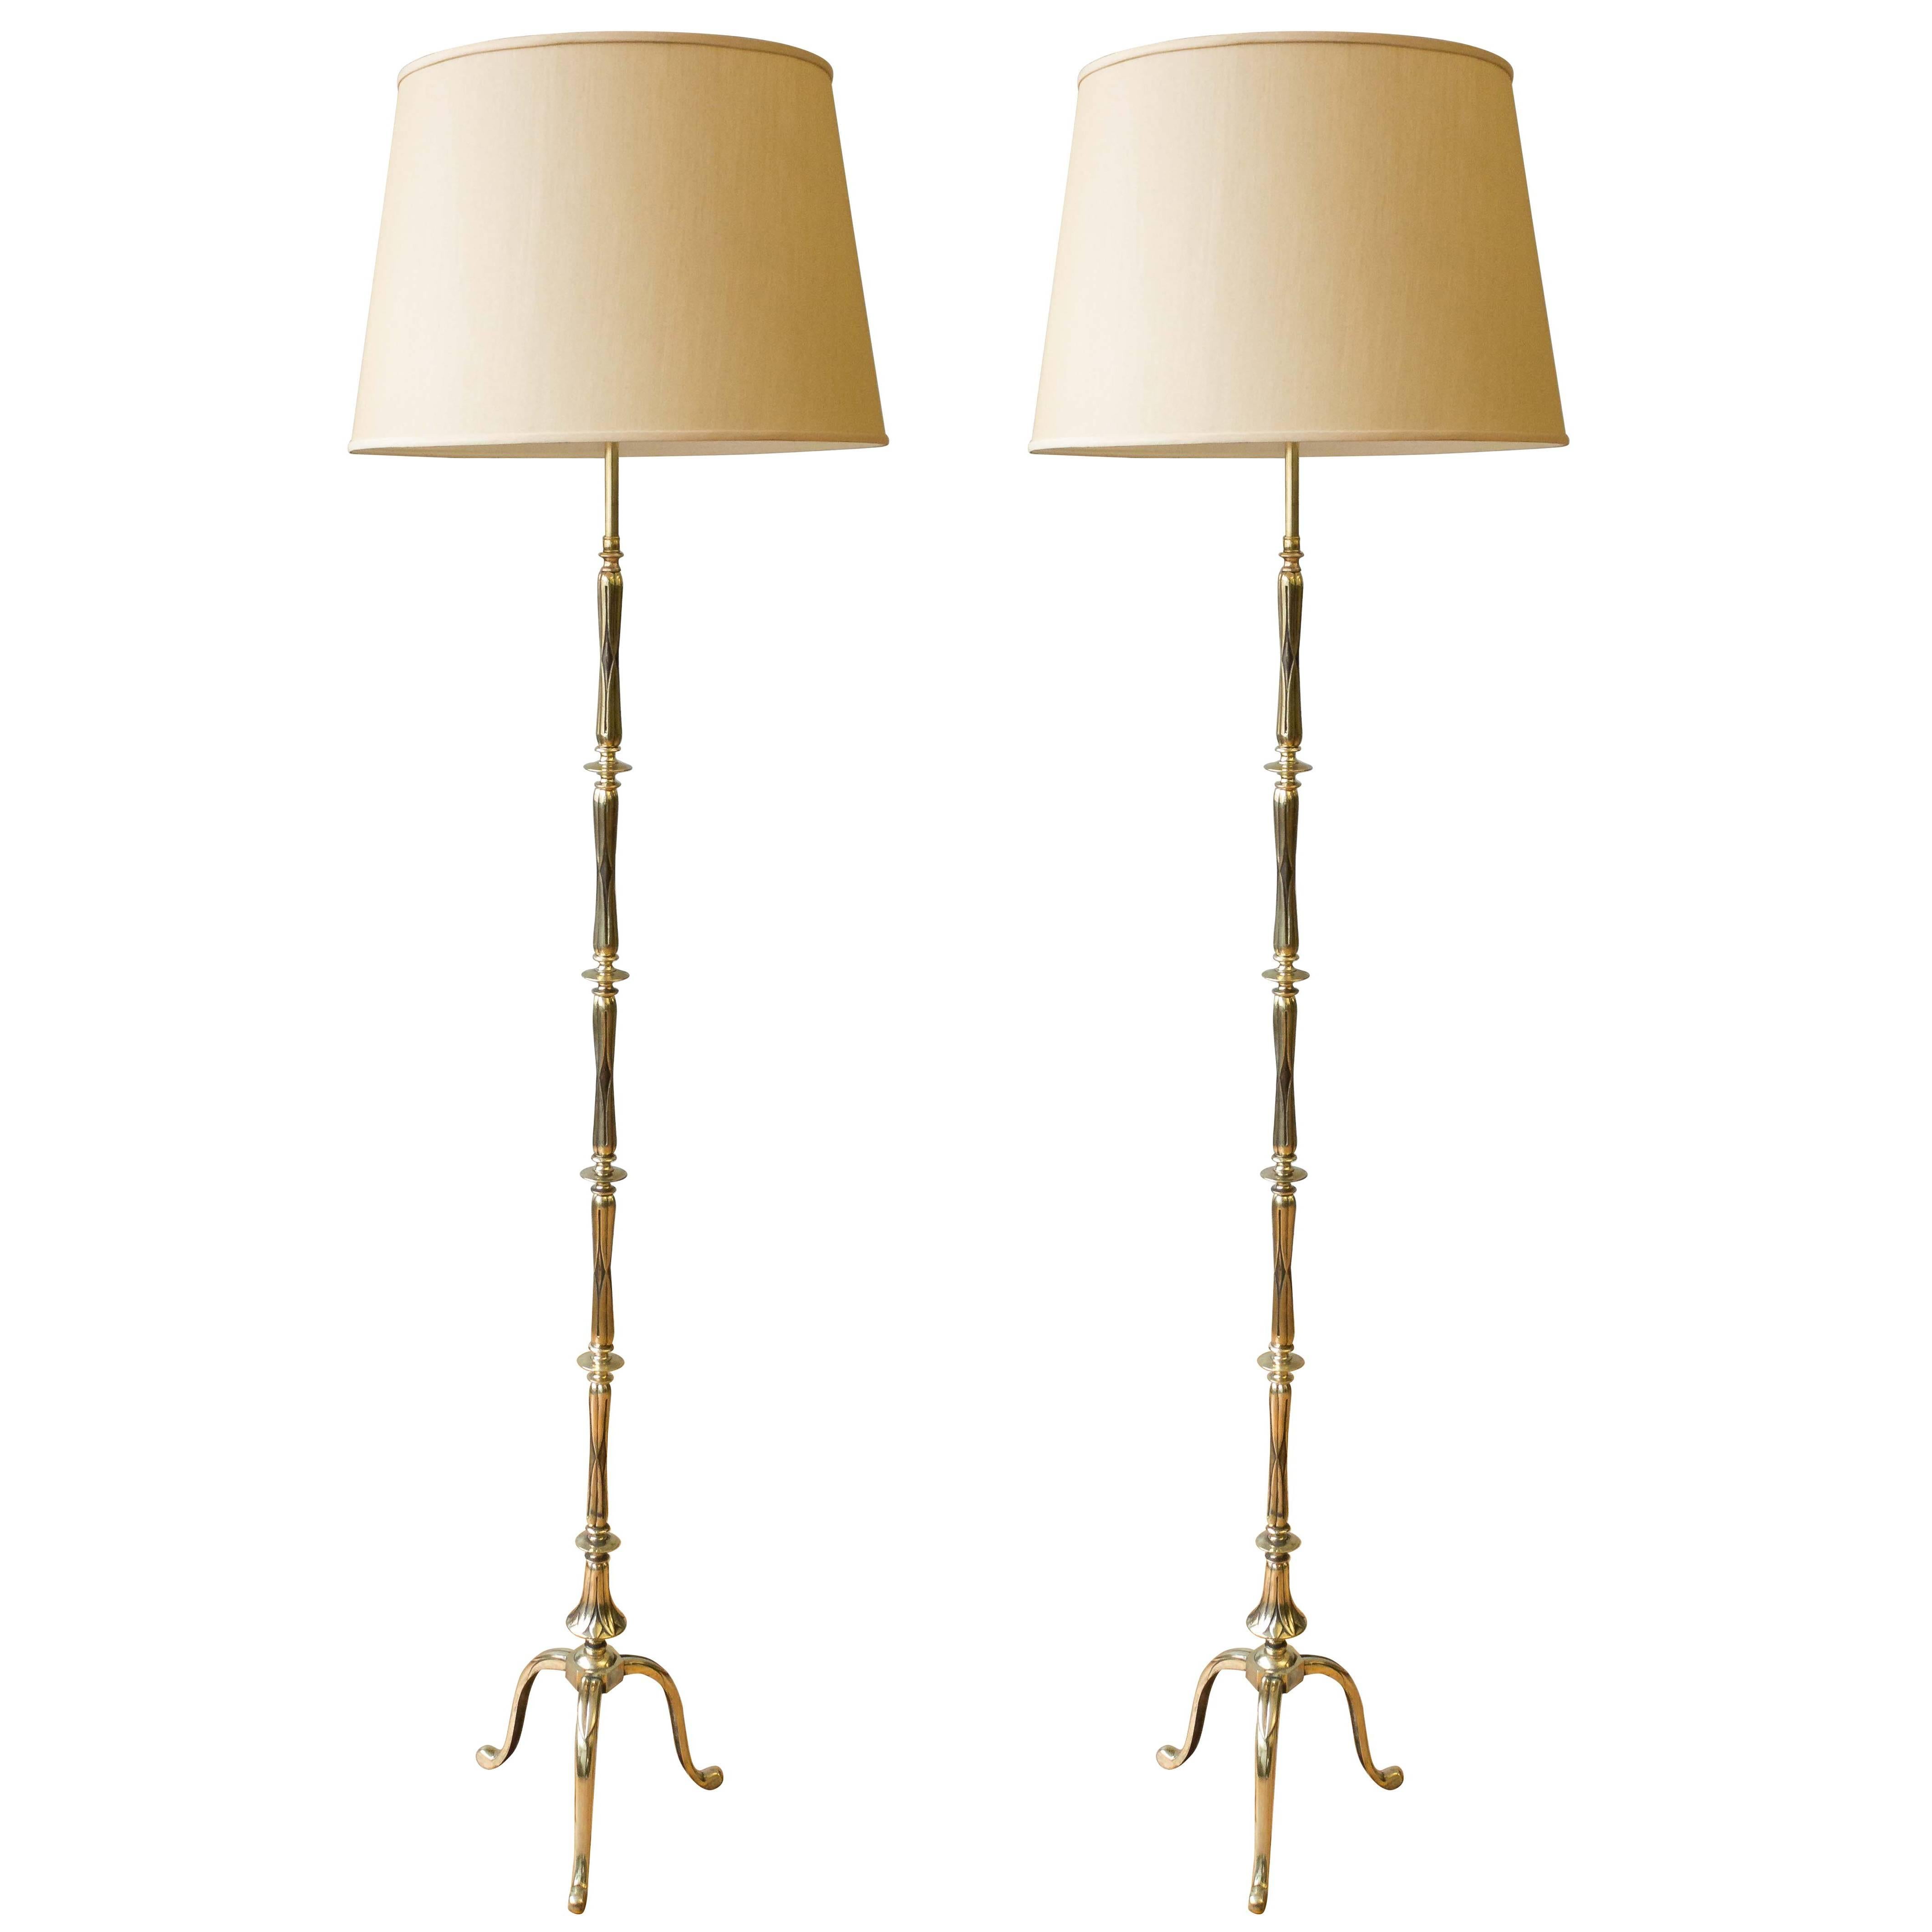 Pair of French Art Deco Style Floor Lamps